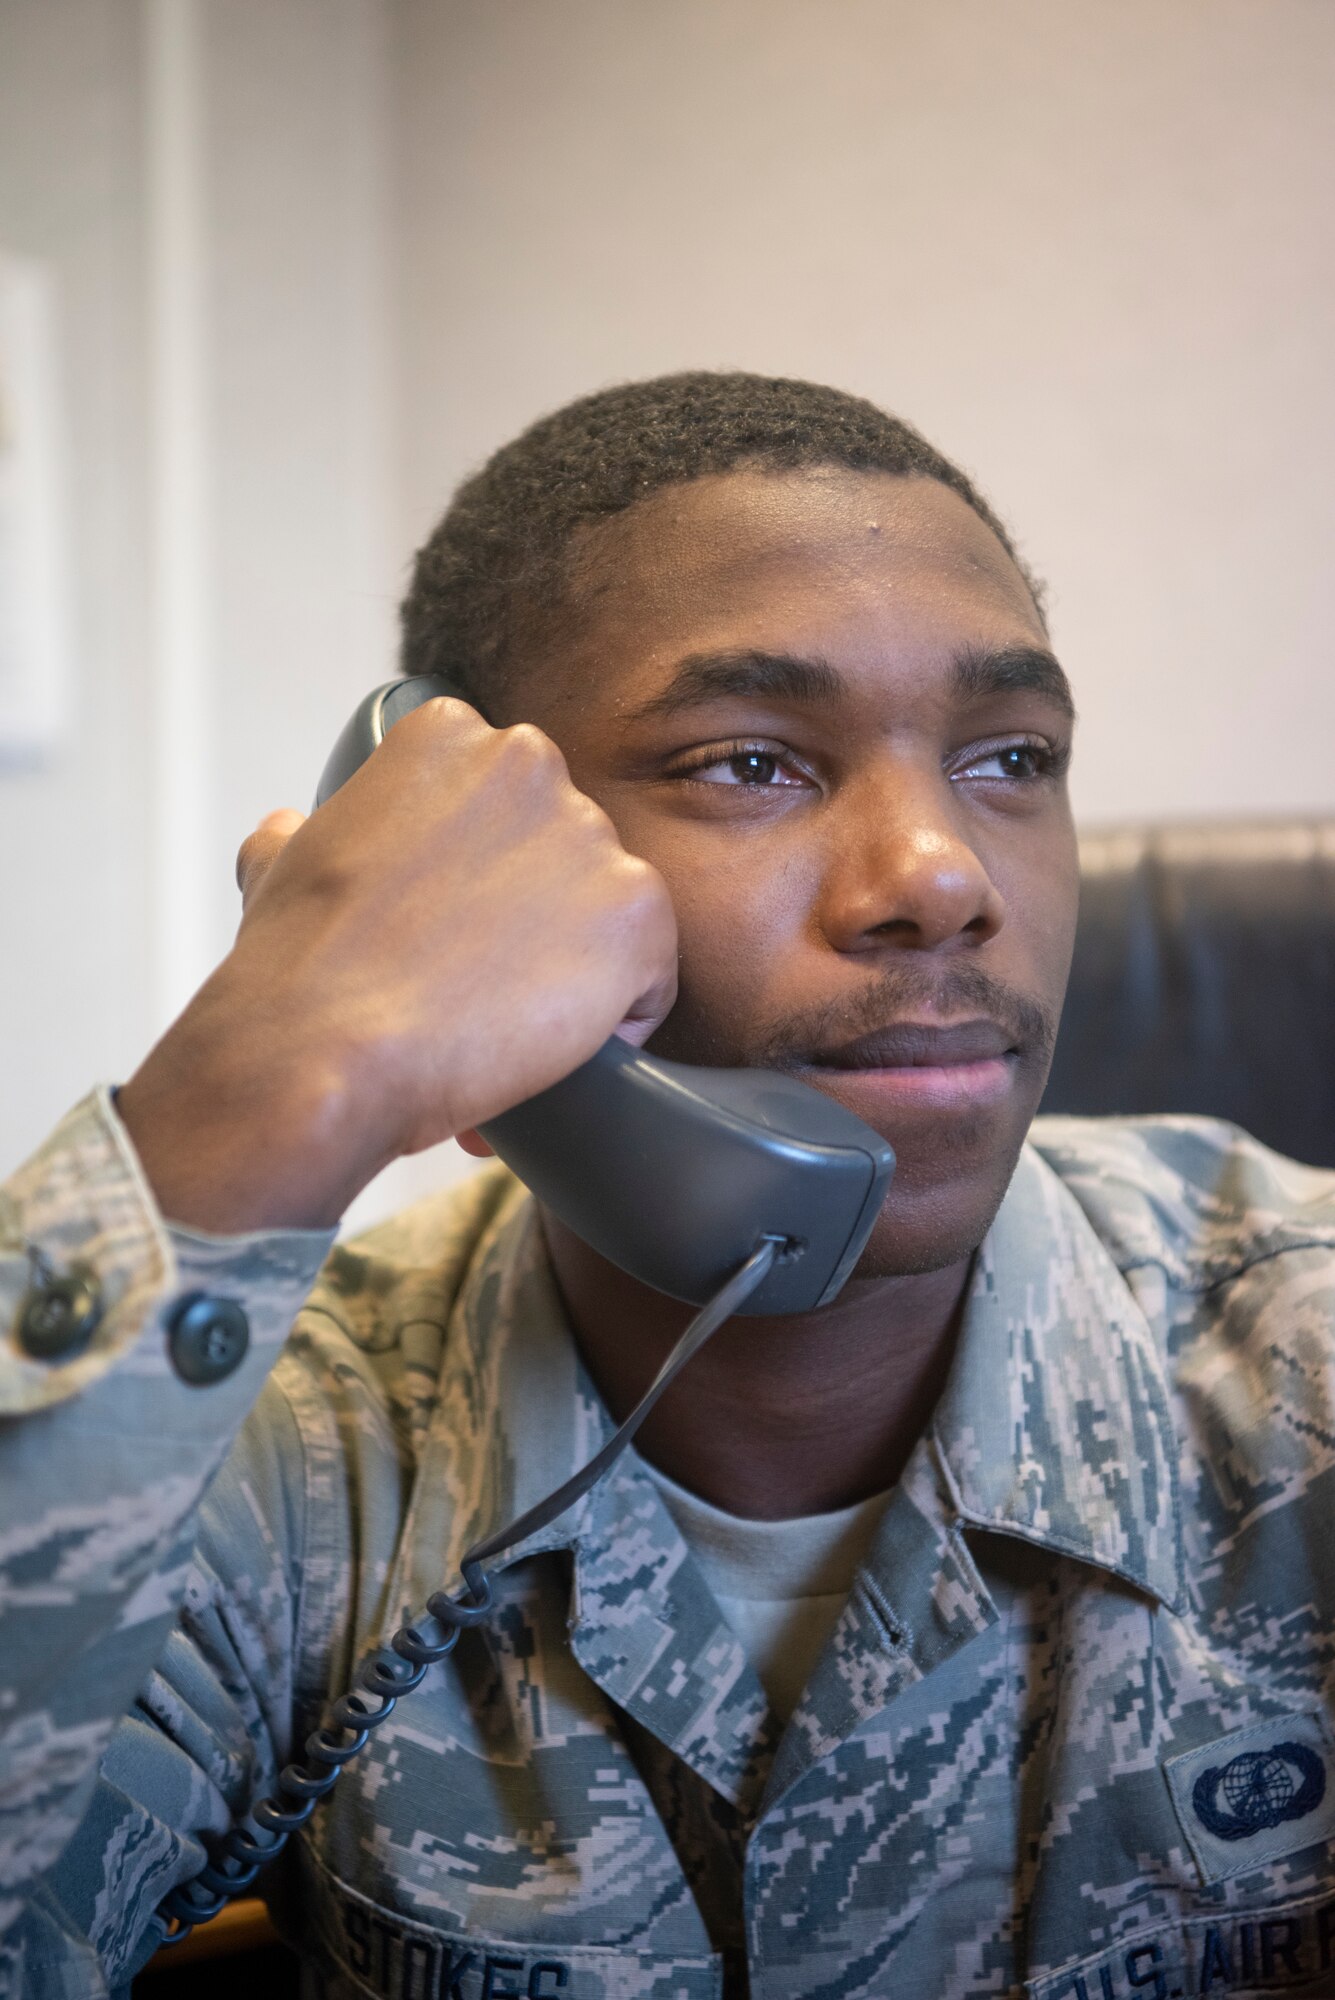 Airman 1st Class Tyran Stokes, 100th Wing Staff Agencies unit control center representative, listens to an agency chief report the quarantine status of an Airman April 8, 2020, at RAF Mildenhall, England. The UCC representatives update the status of military members in quarantine or isolation daily to provide an accurate view to leadership of how the virus is impacting the base. (U.S. Air Force photo by Airman 1st Class Joseph Barron)